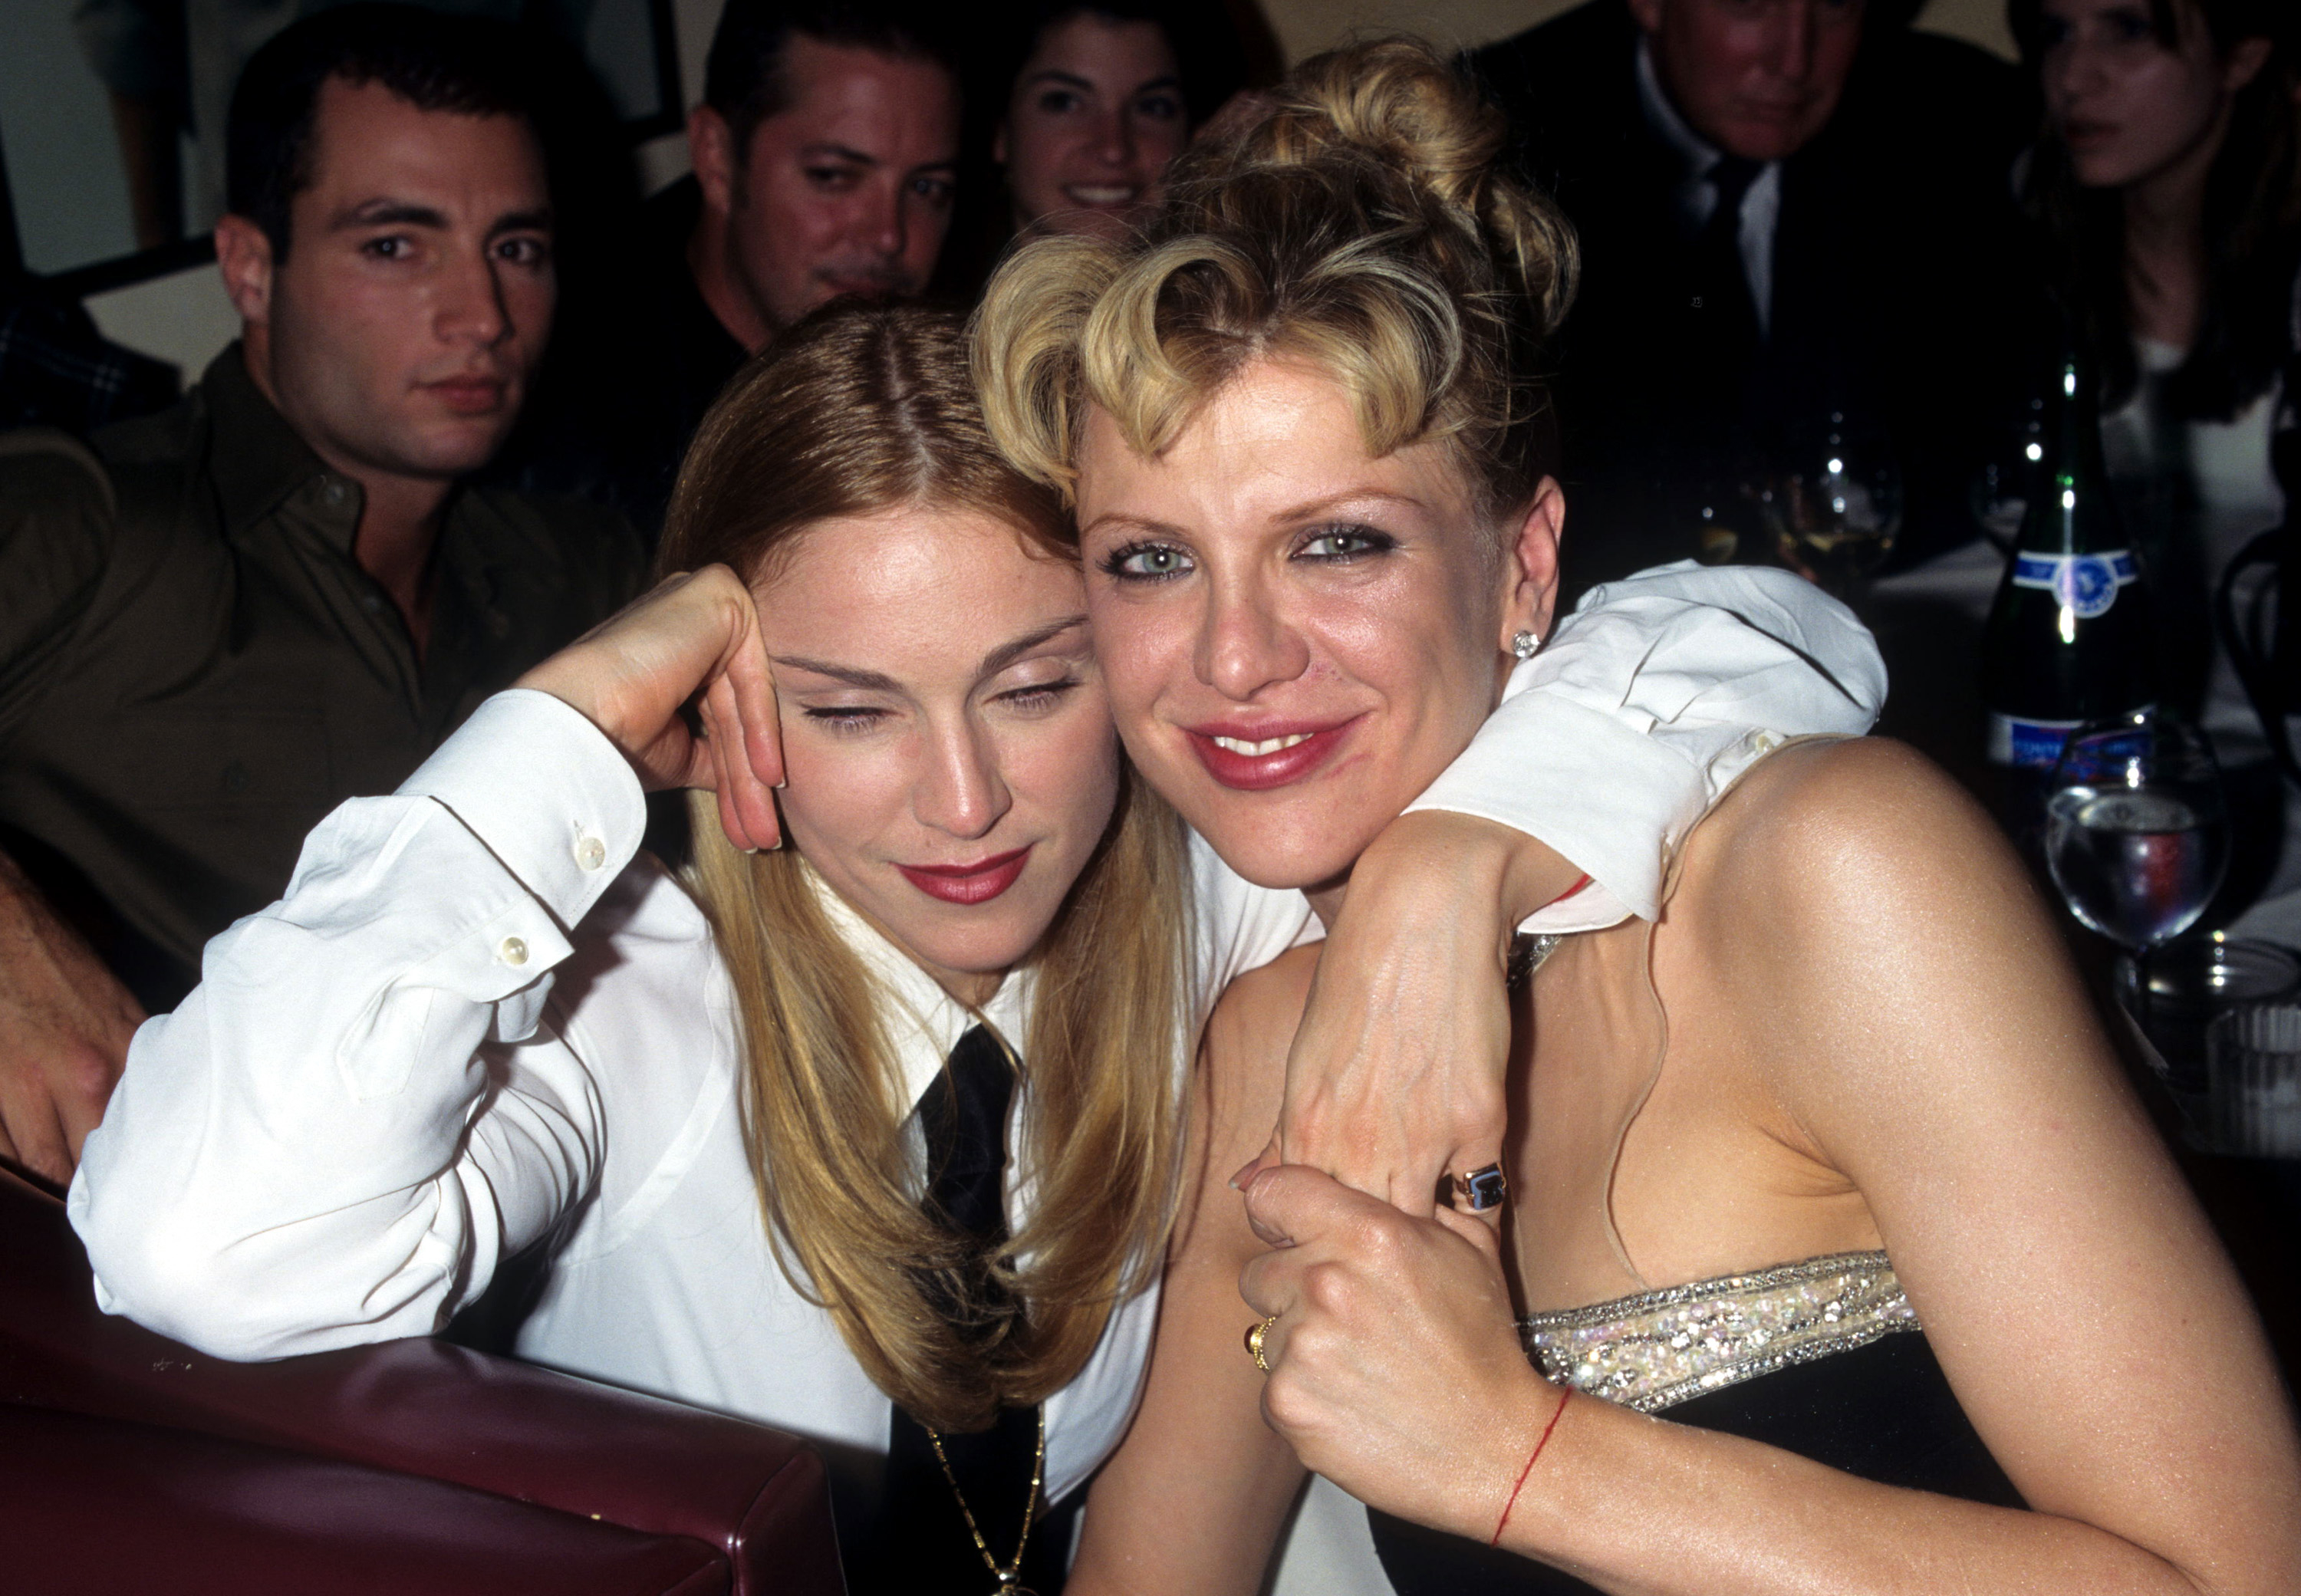 Madonna and Courtney Love with their arms around each other as they take a picture at an event